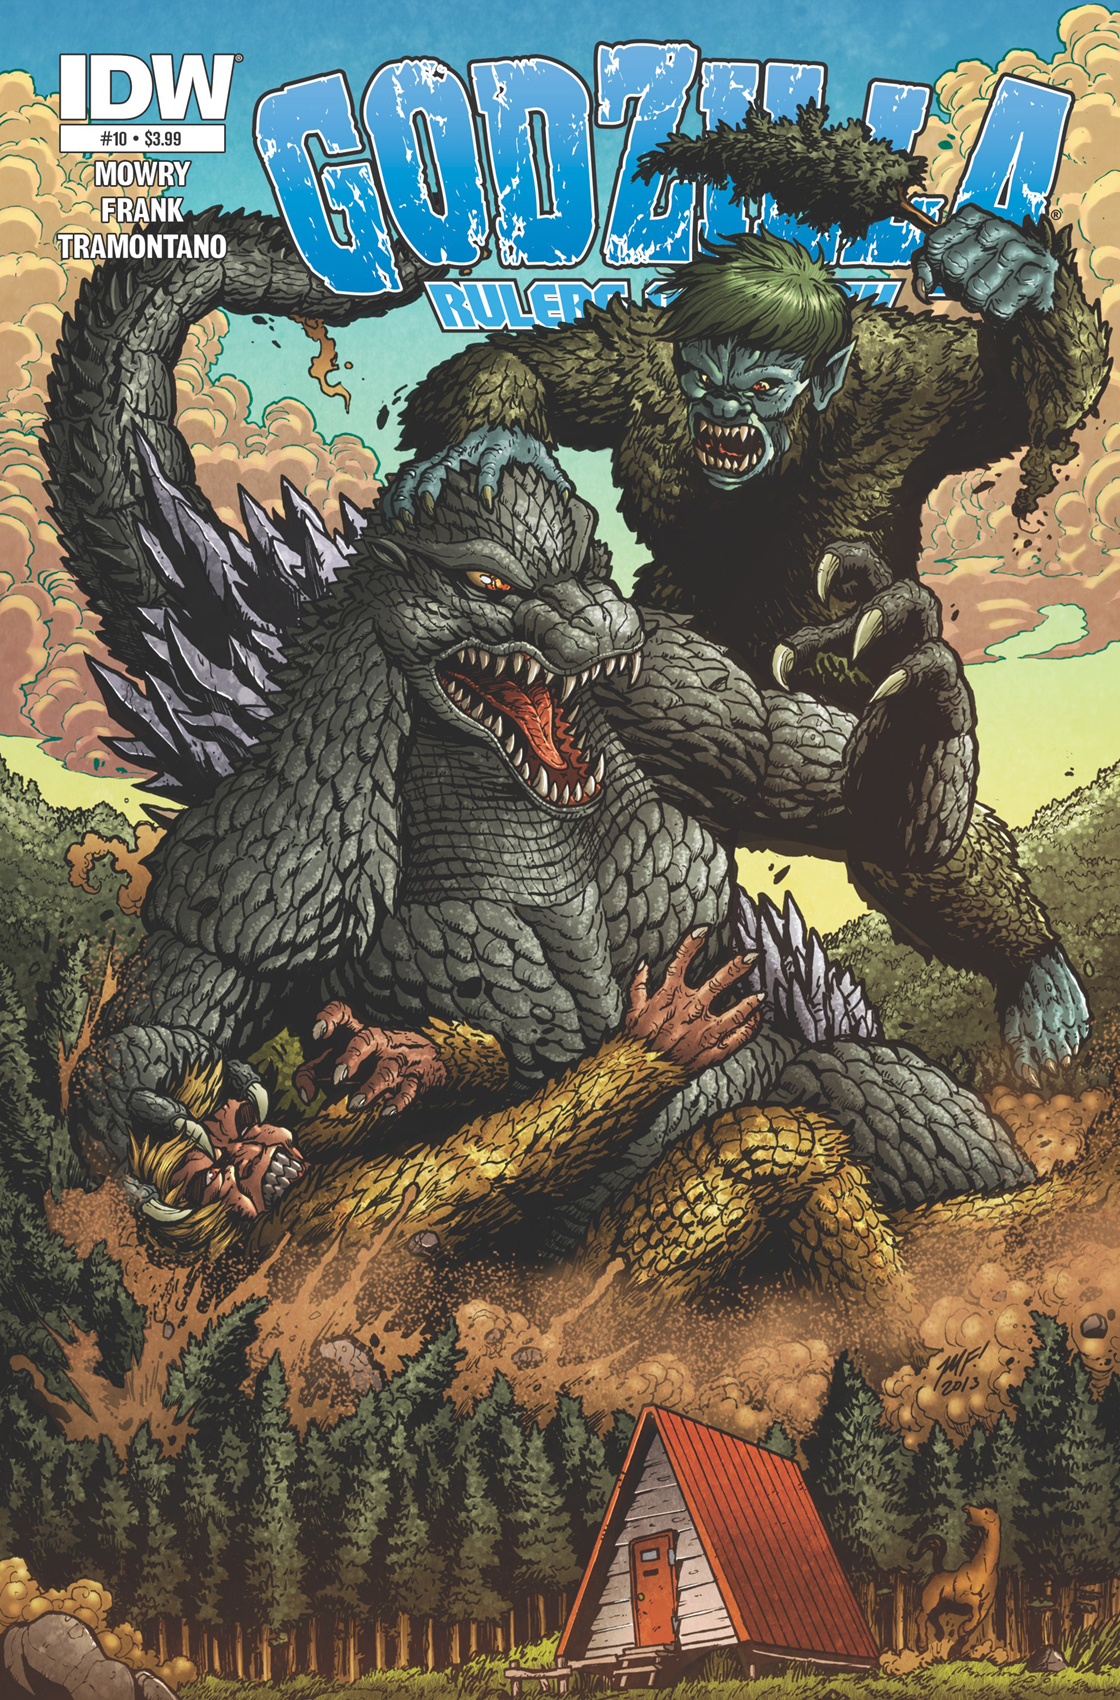 Godzilla: Complete Rulers of Earth #2 - Volume Two (Issue)